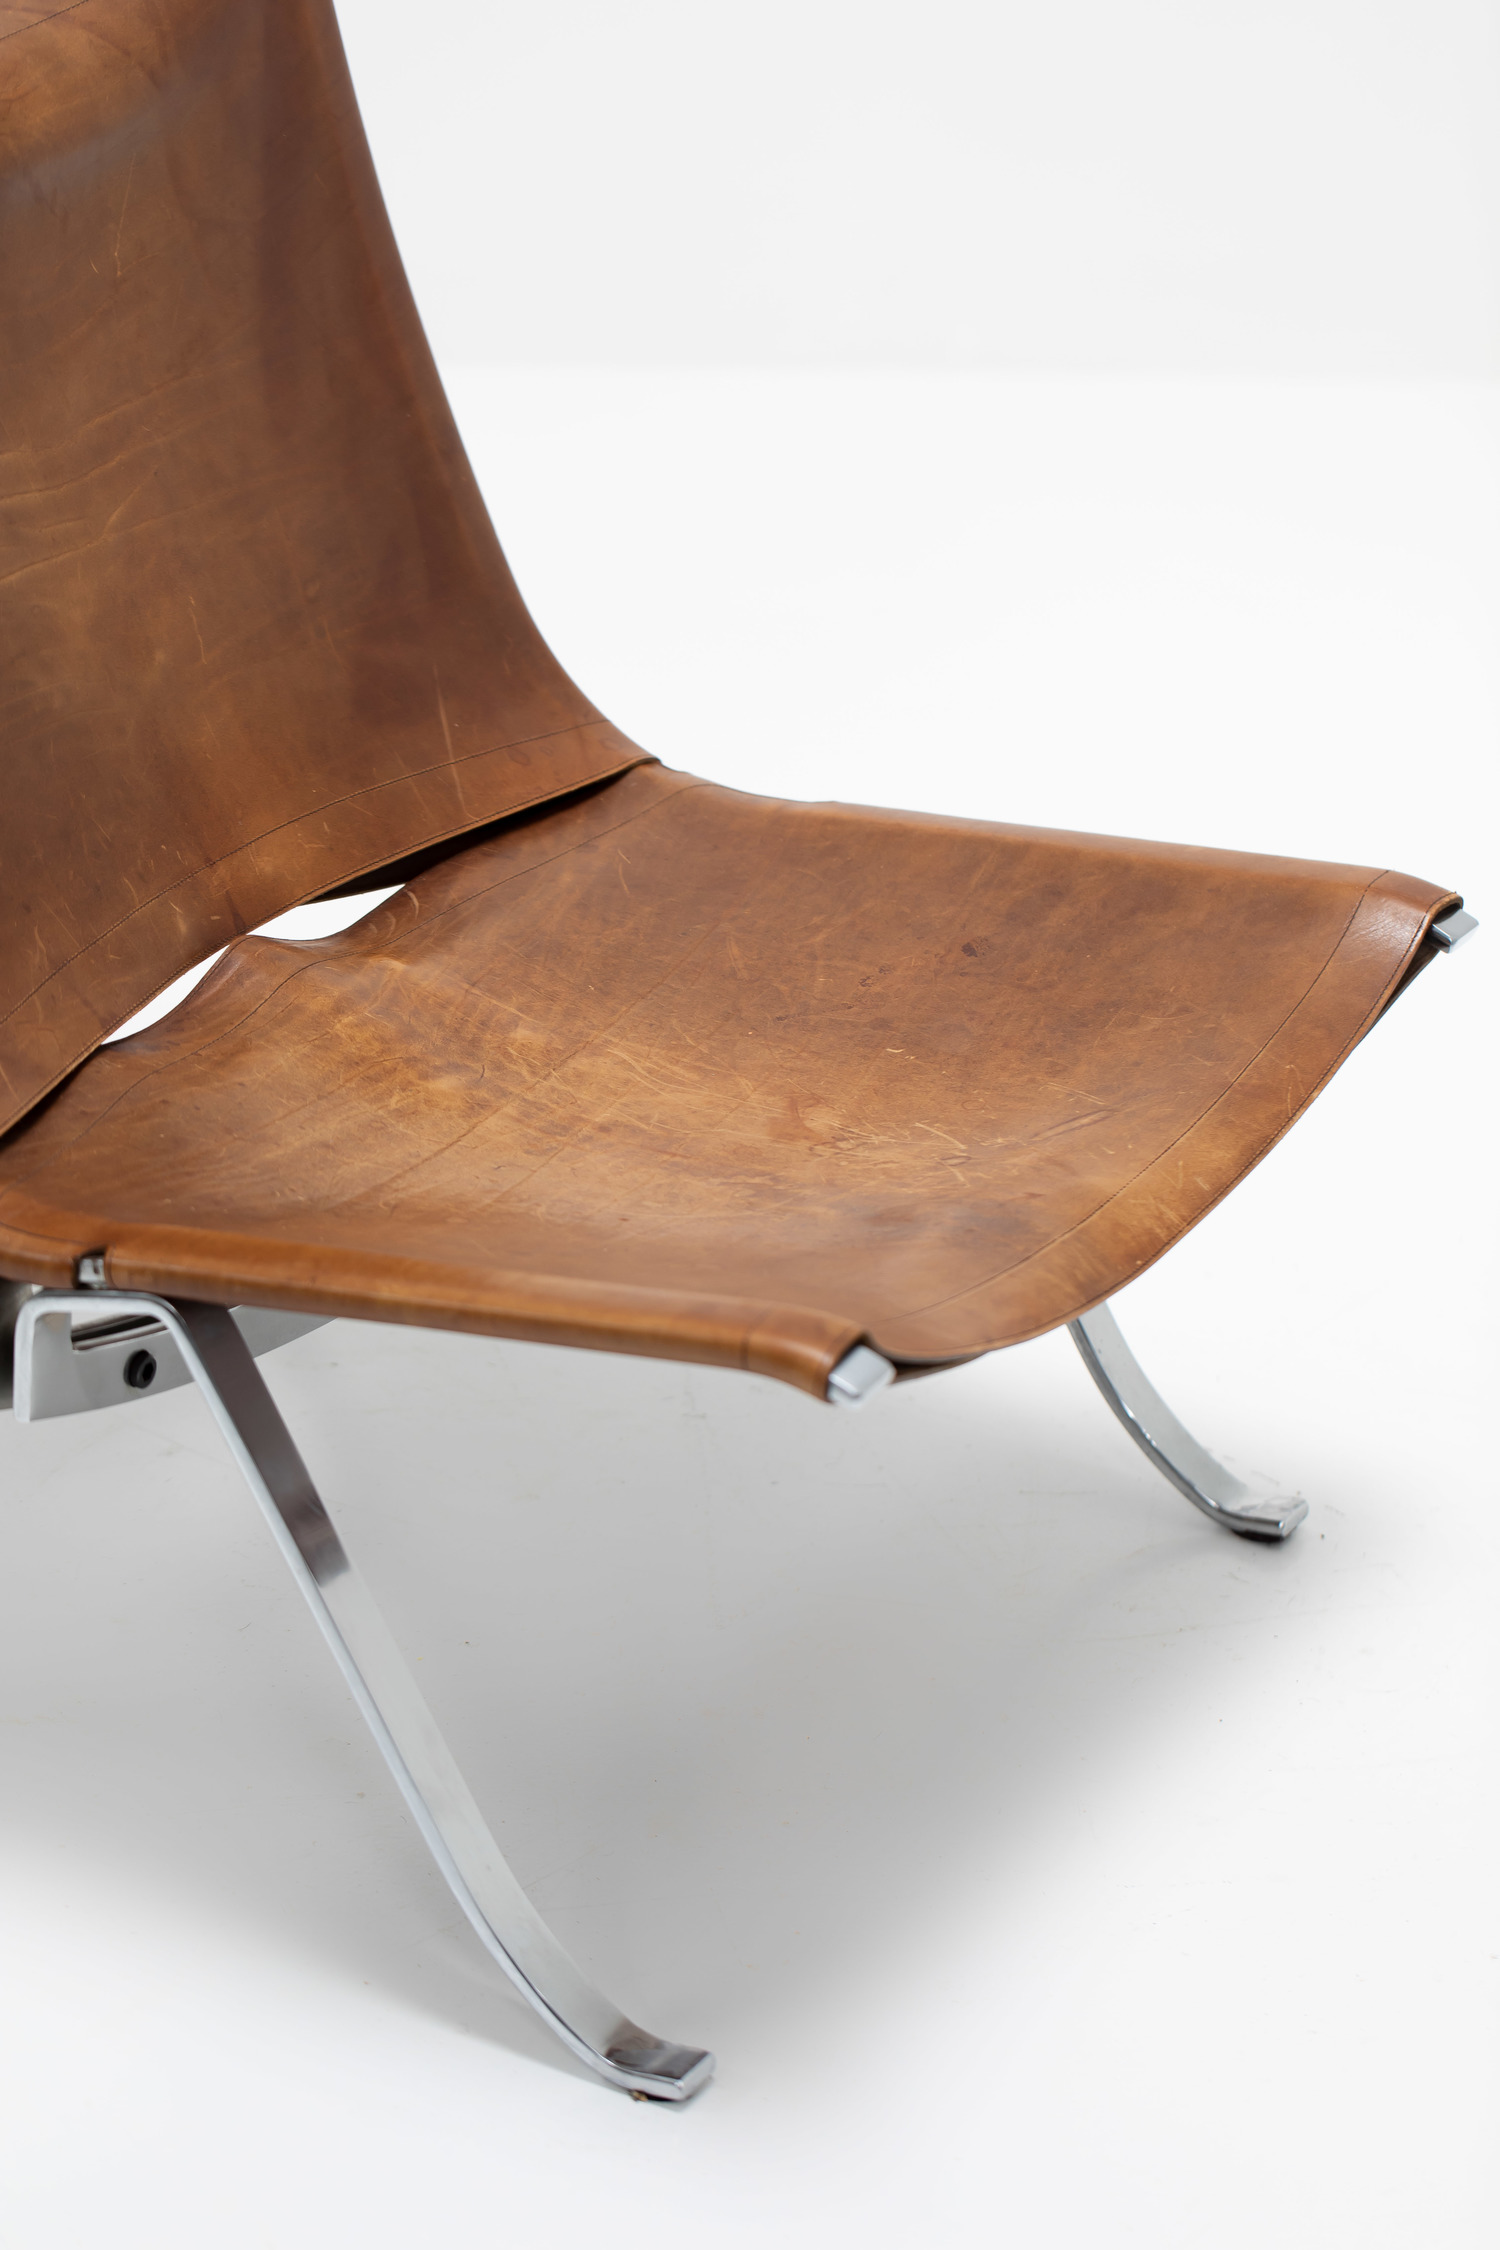 Easy Chair by P. Fabricius and J. Kastholm for Arnold Exclusiv